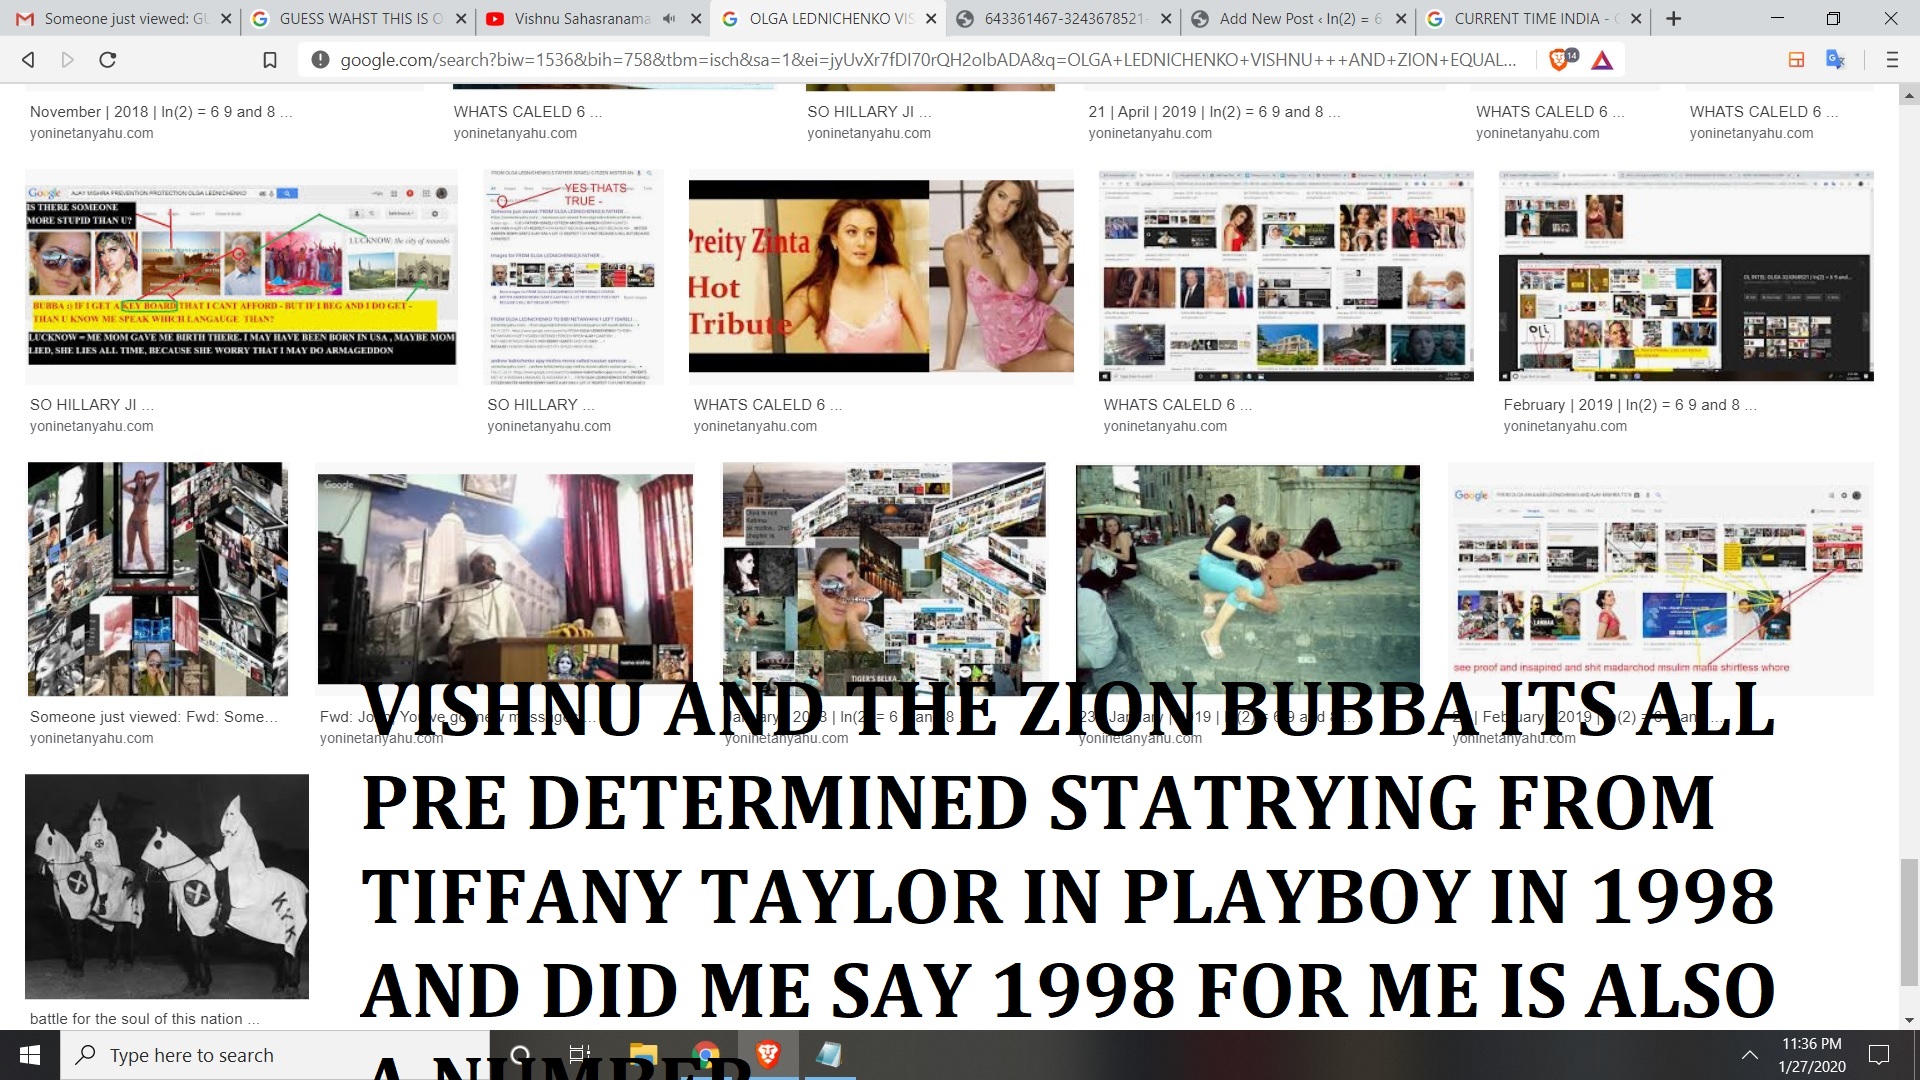 VISHNU AND THE ZION BUBBA ITS ALL PRE DETERMINED STATRYING FROM TIFFY TAYLOR IN PLAYBOY IN 1998 AND DID ME SAY 1998 FOR ME IS ALSO A NUMBER